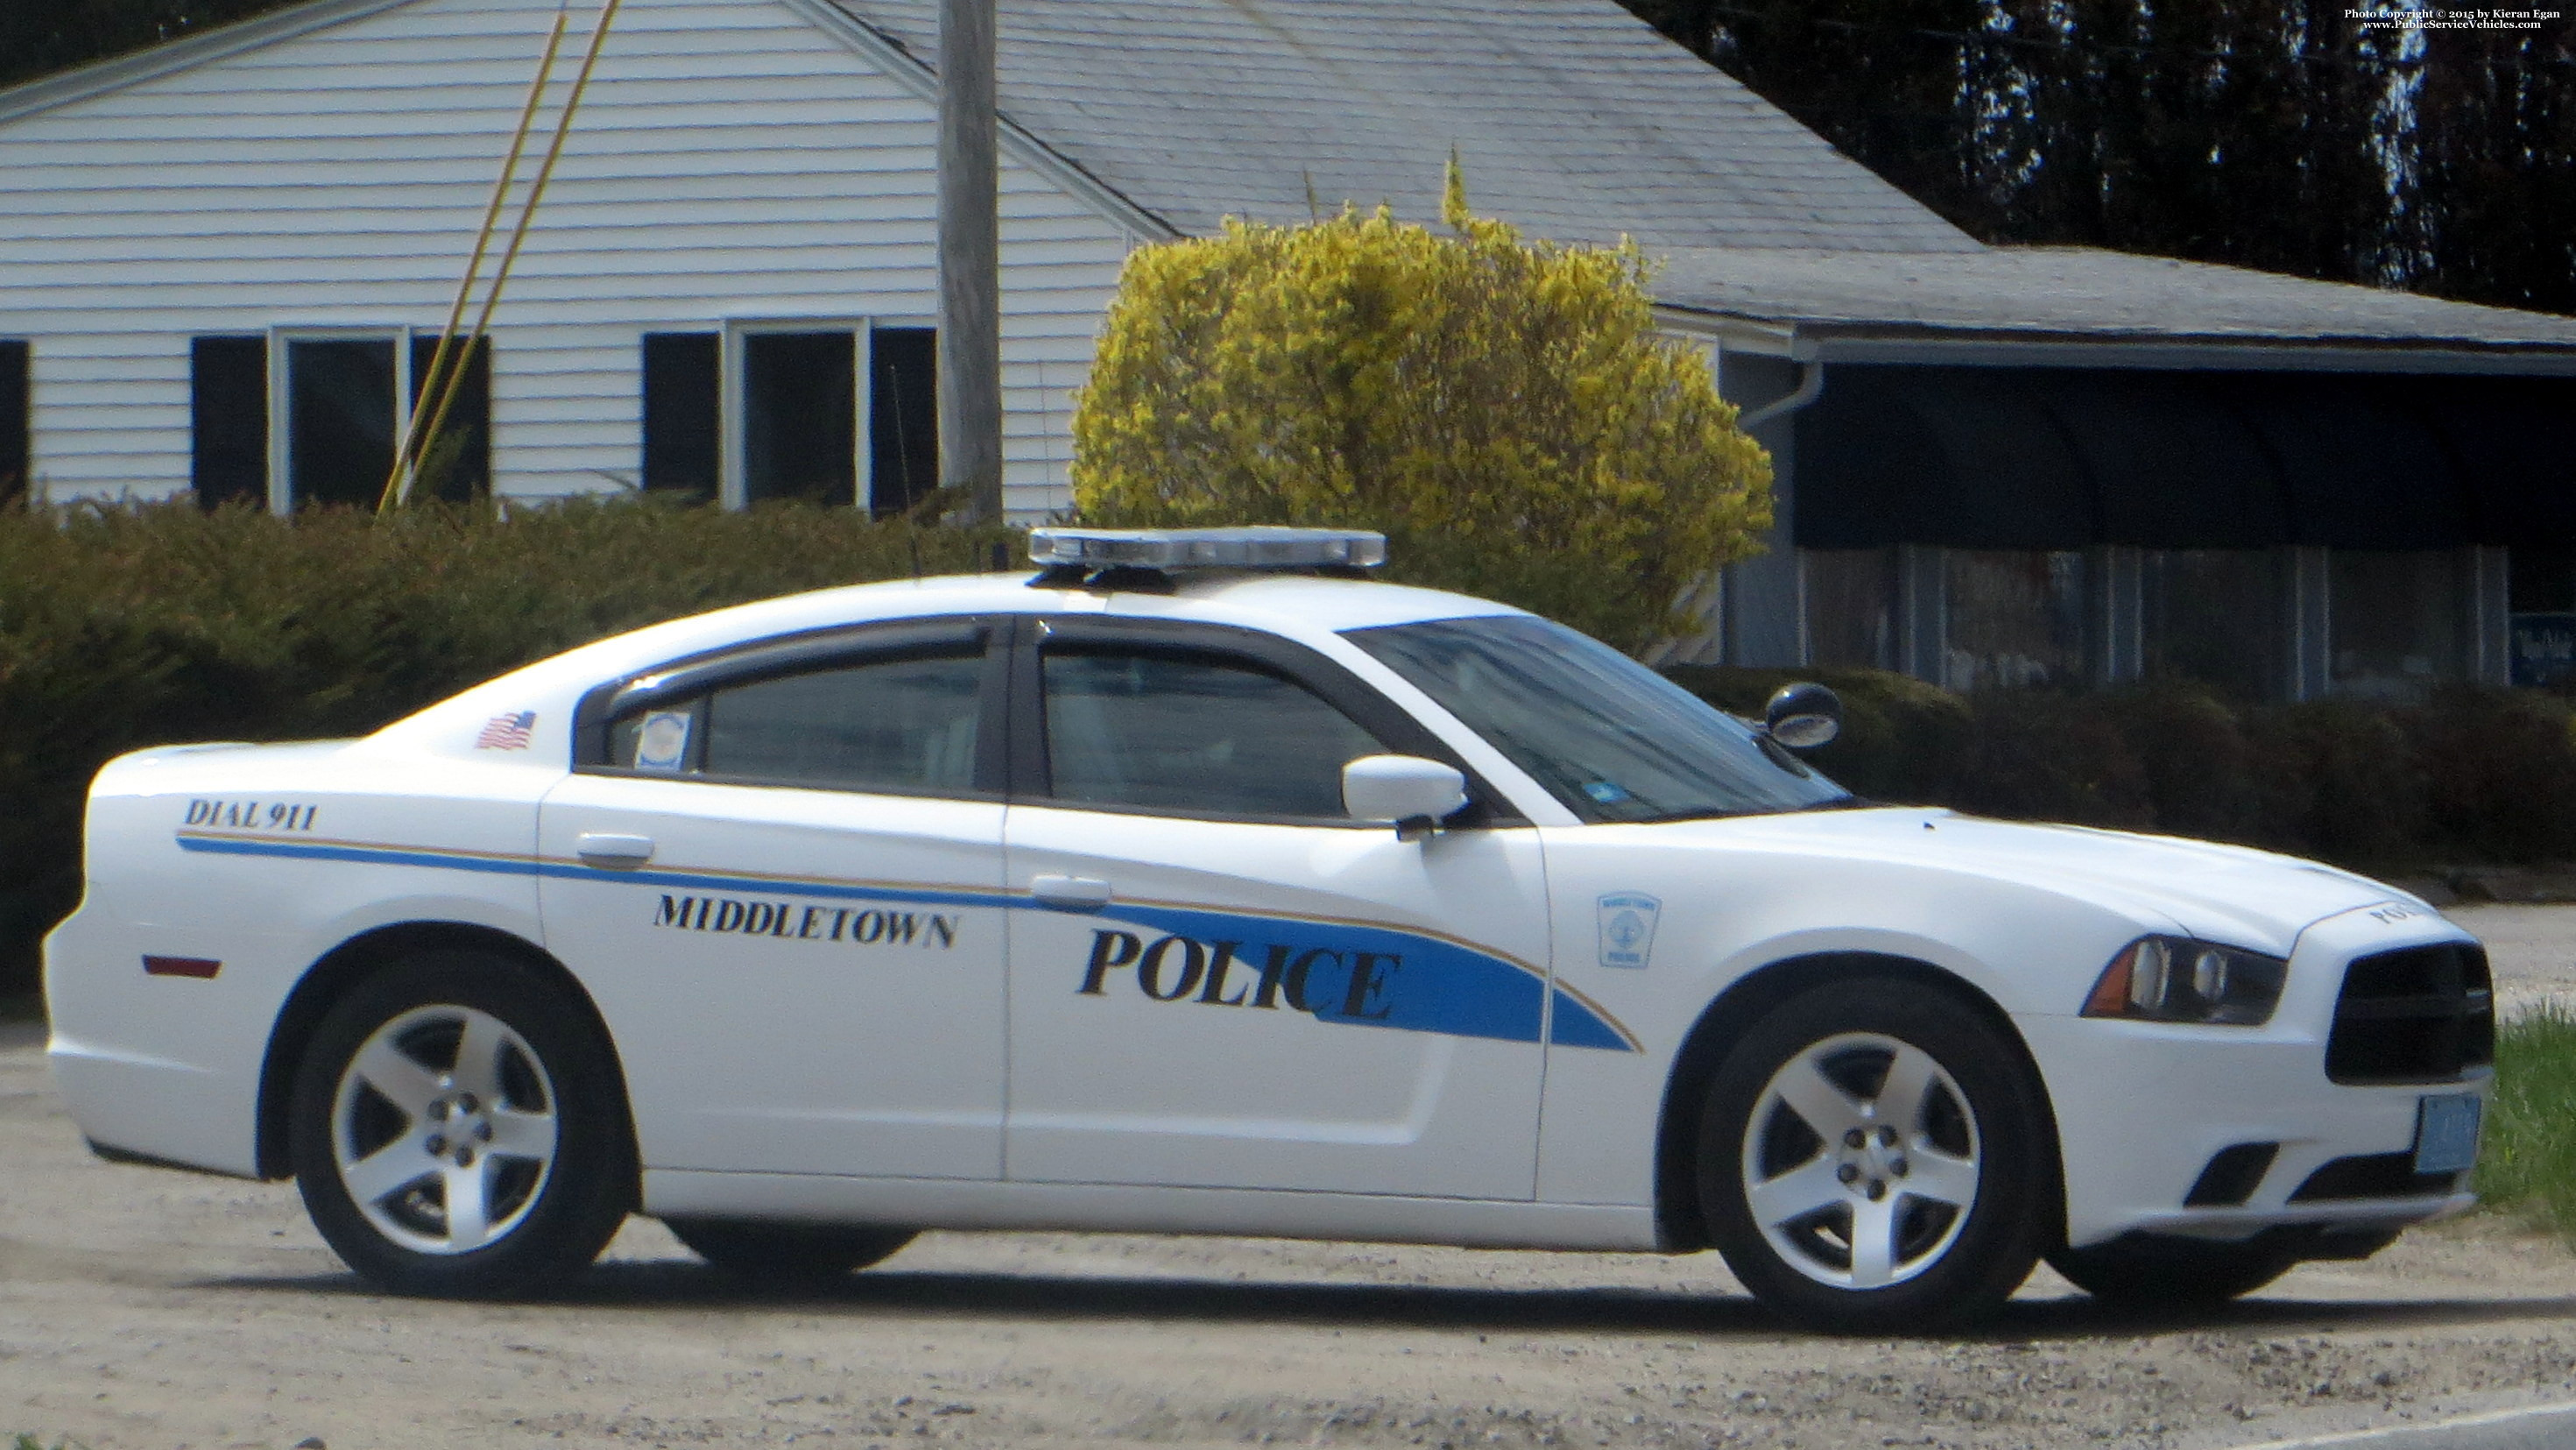 A photo  of Middletown Police
            Cruiser 4119, a 2014 Dodge Charger             taken by Kieran Egan